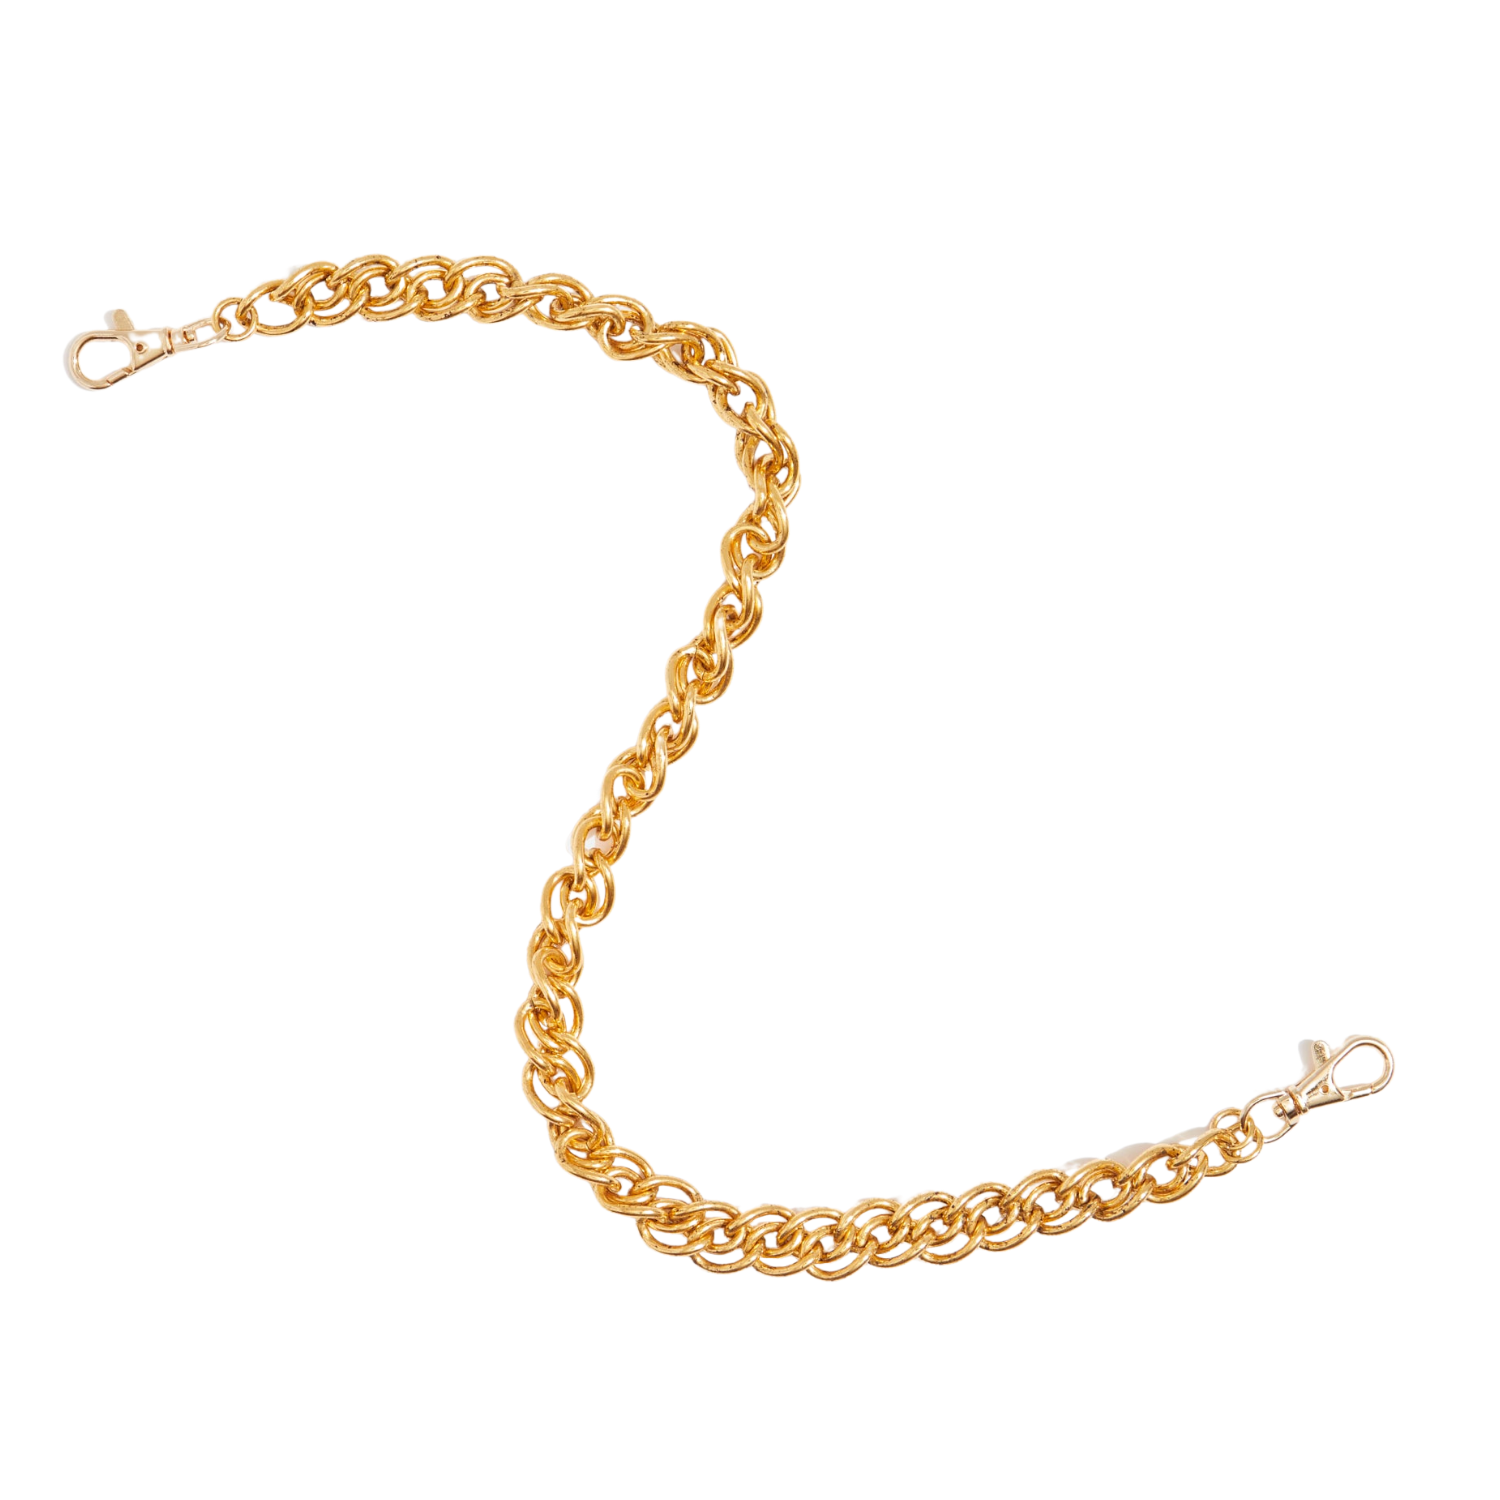 3D Loop Chain Necklace